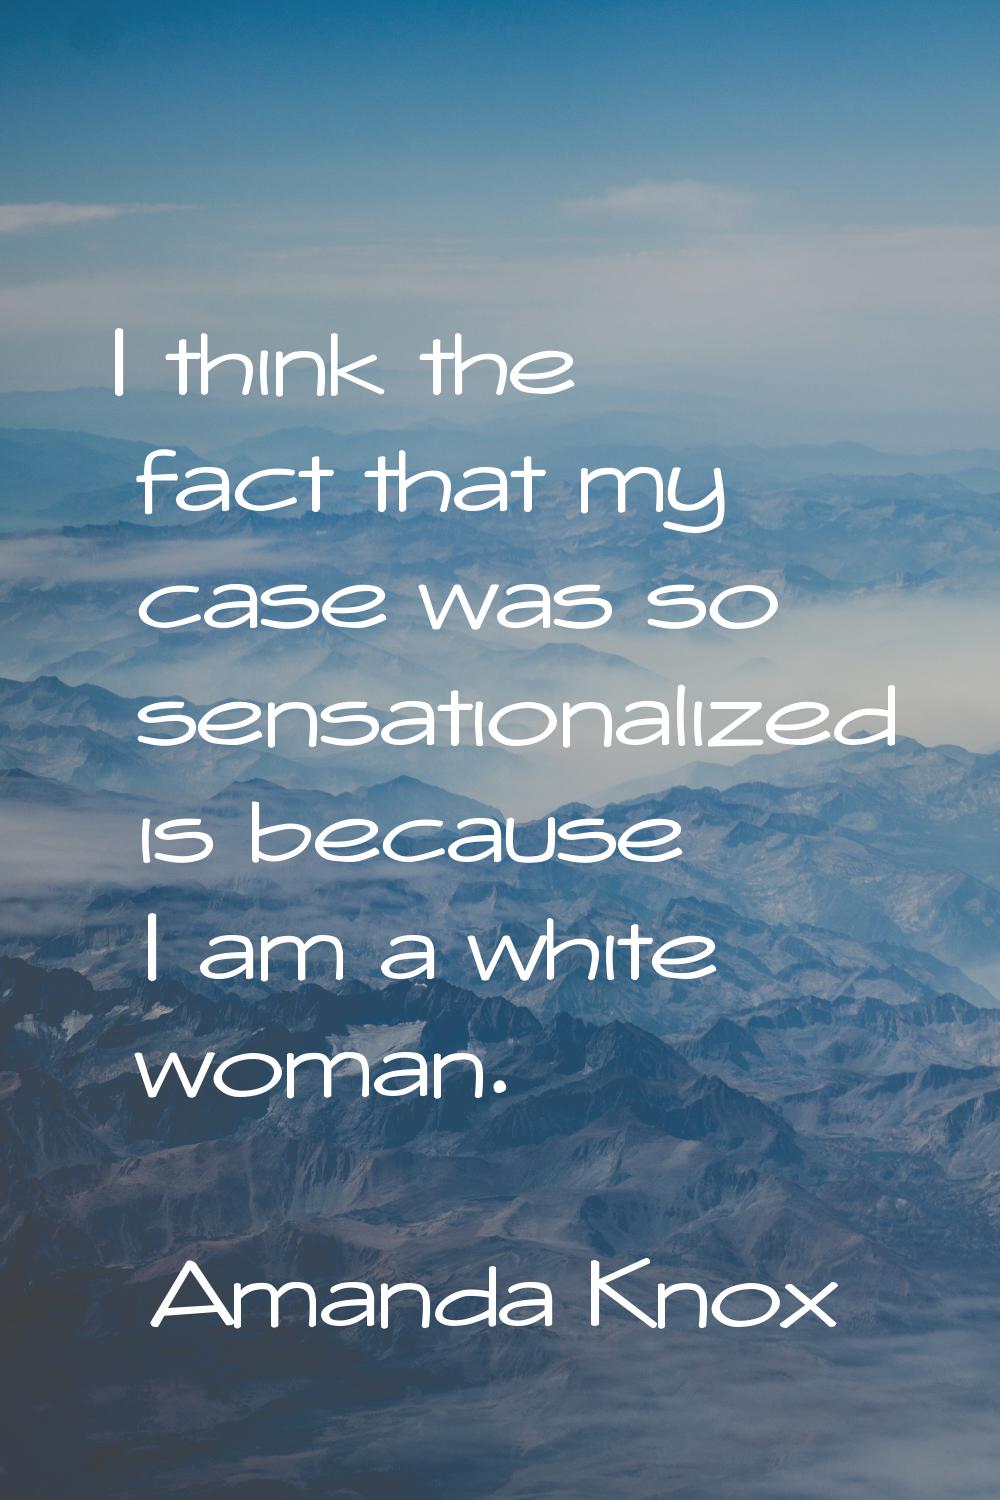 I think the fact that my case was so sensationalized is because I am a white woman.